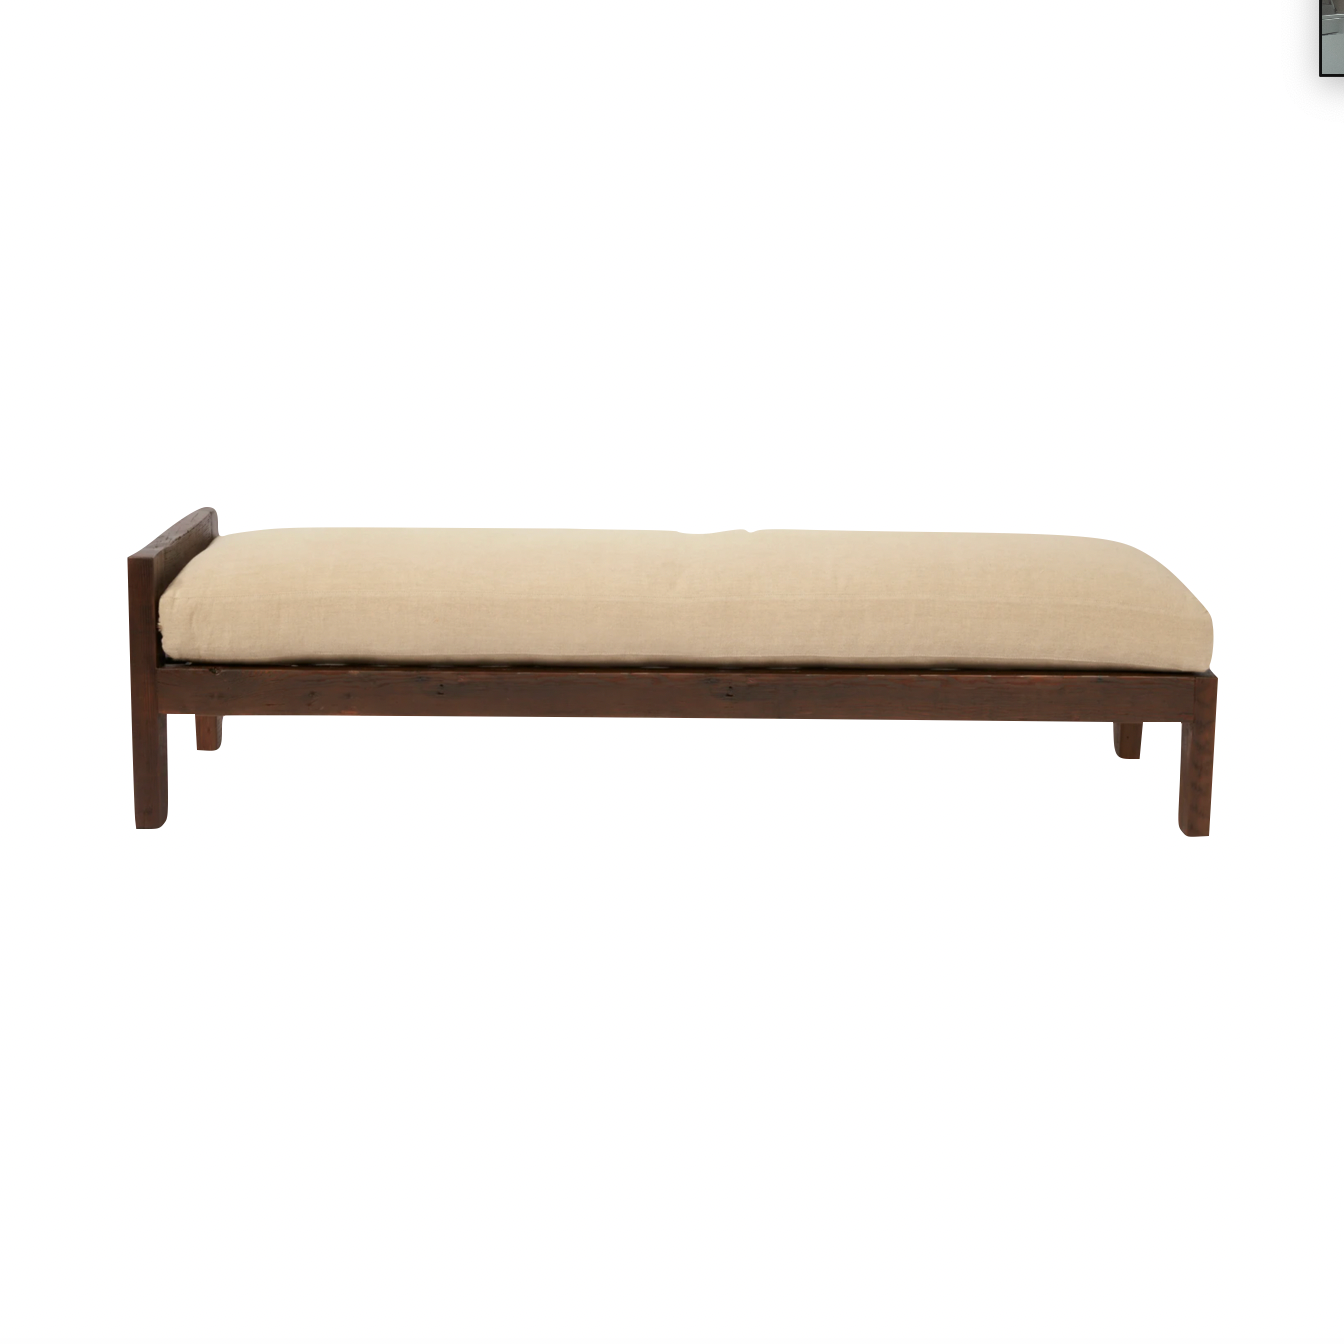 A beautifully crafted modern piece, the Corpus Daybed from Cisco Brothers is sure to bring comfort and style to any space. Photographed in Brevard Burlap.   Overall size: 78"w x 27"d x 18"h